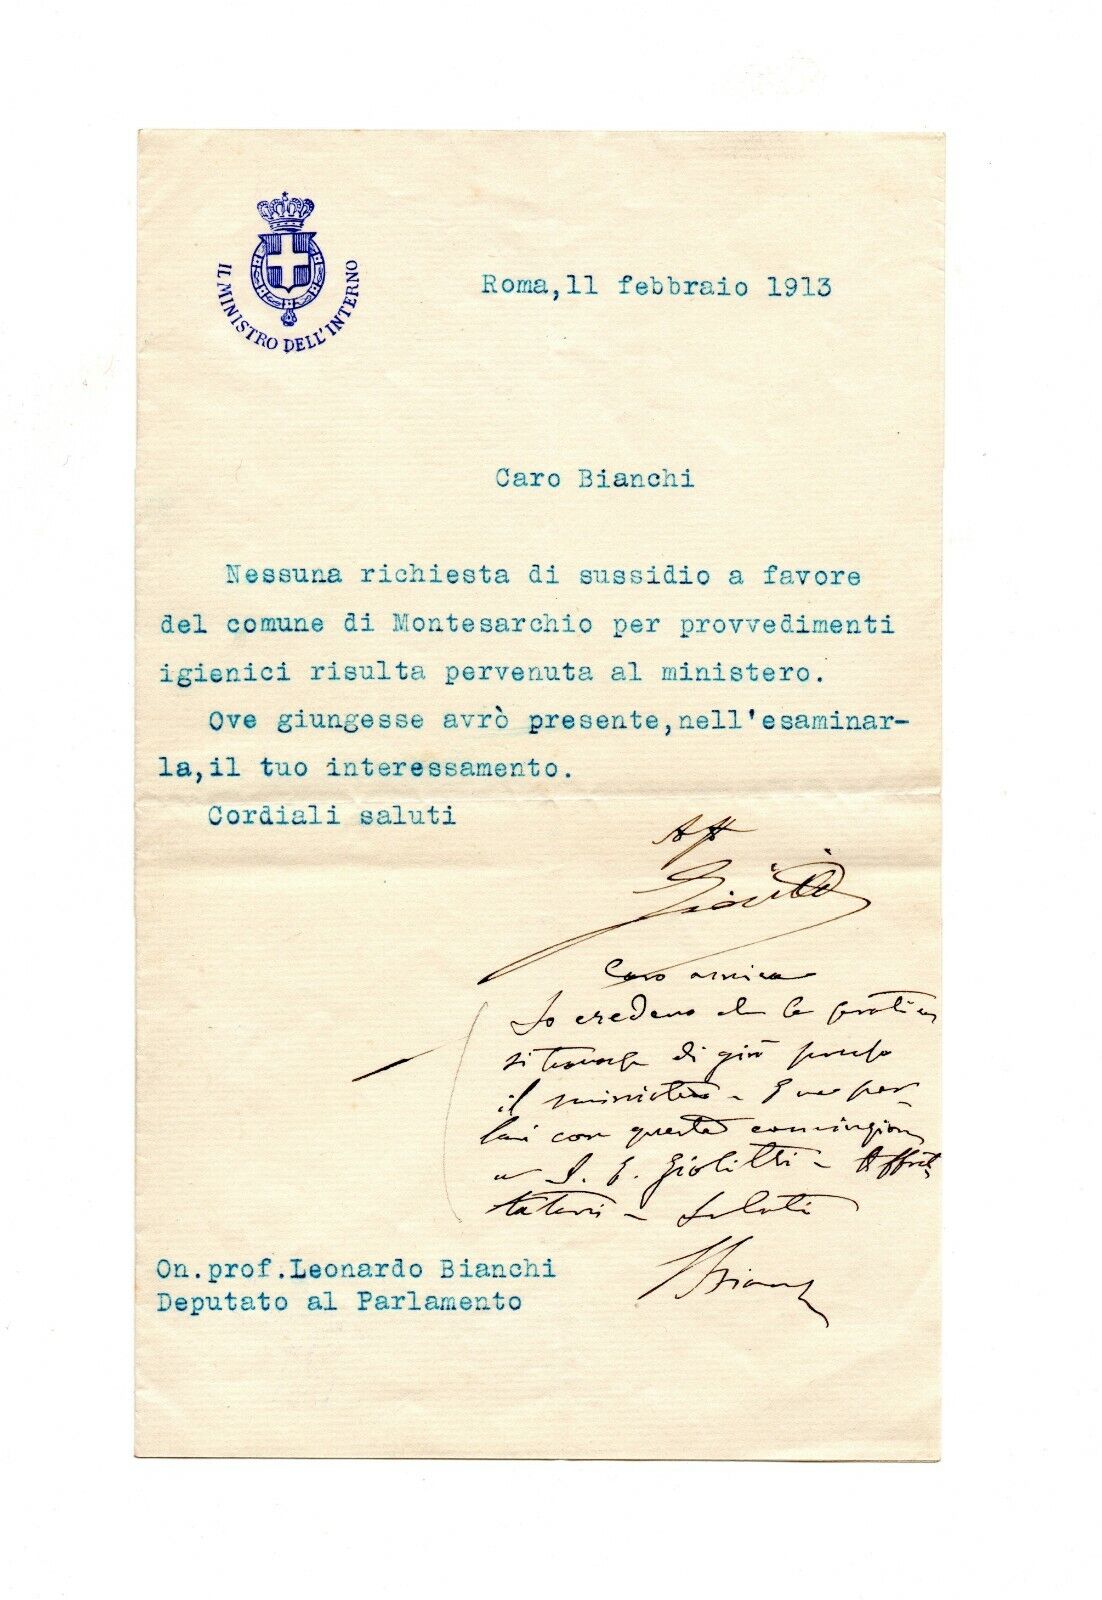 1913 letter SIGNED by the Prime Minister of Italy AND by Dr. Leonardo Bianchi